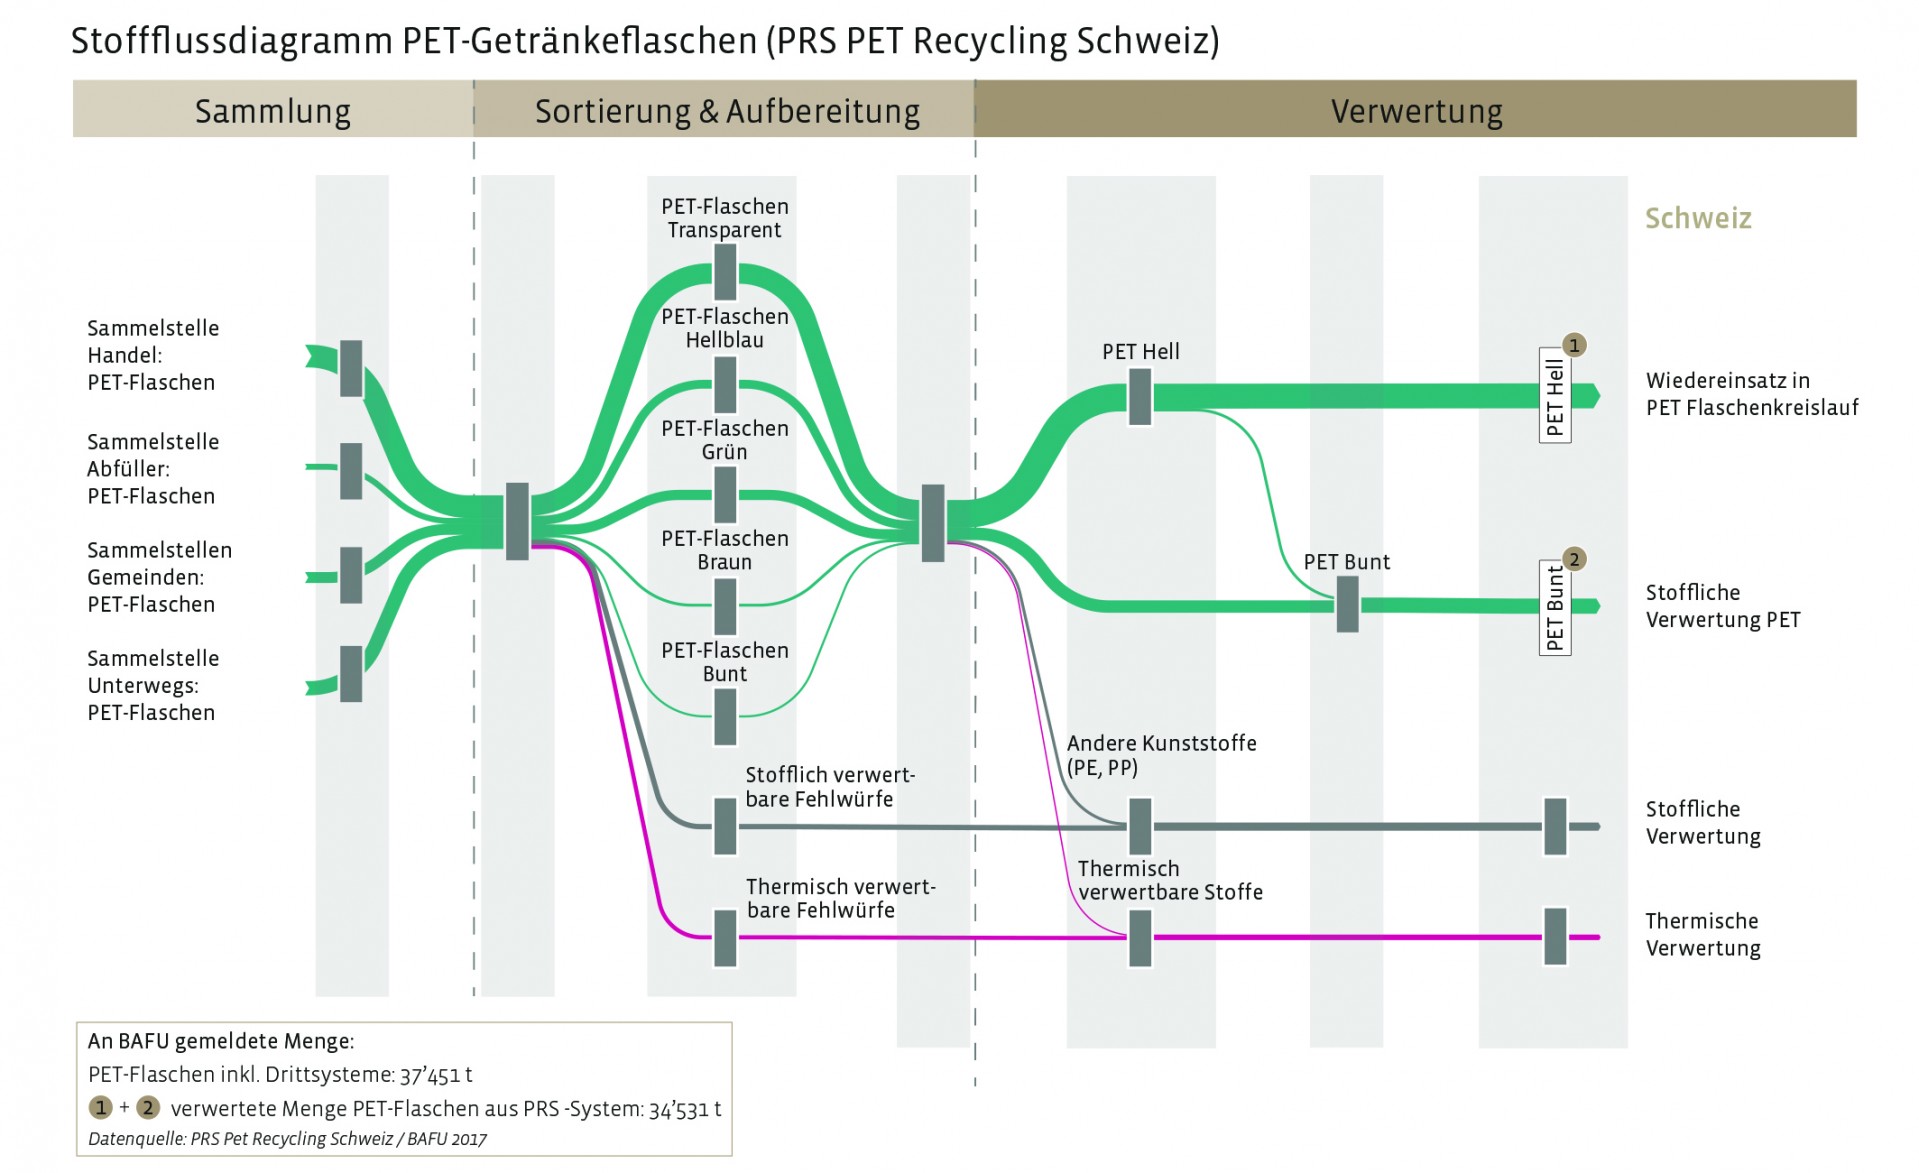 What happens with the PET bottles collected in Switzerland: some is used to produce new bottles, while some is utilised for completely different packaging.